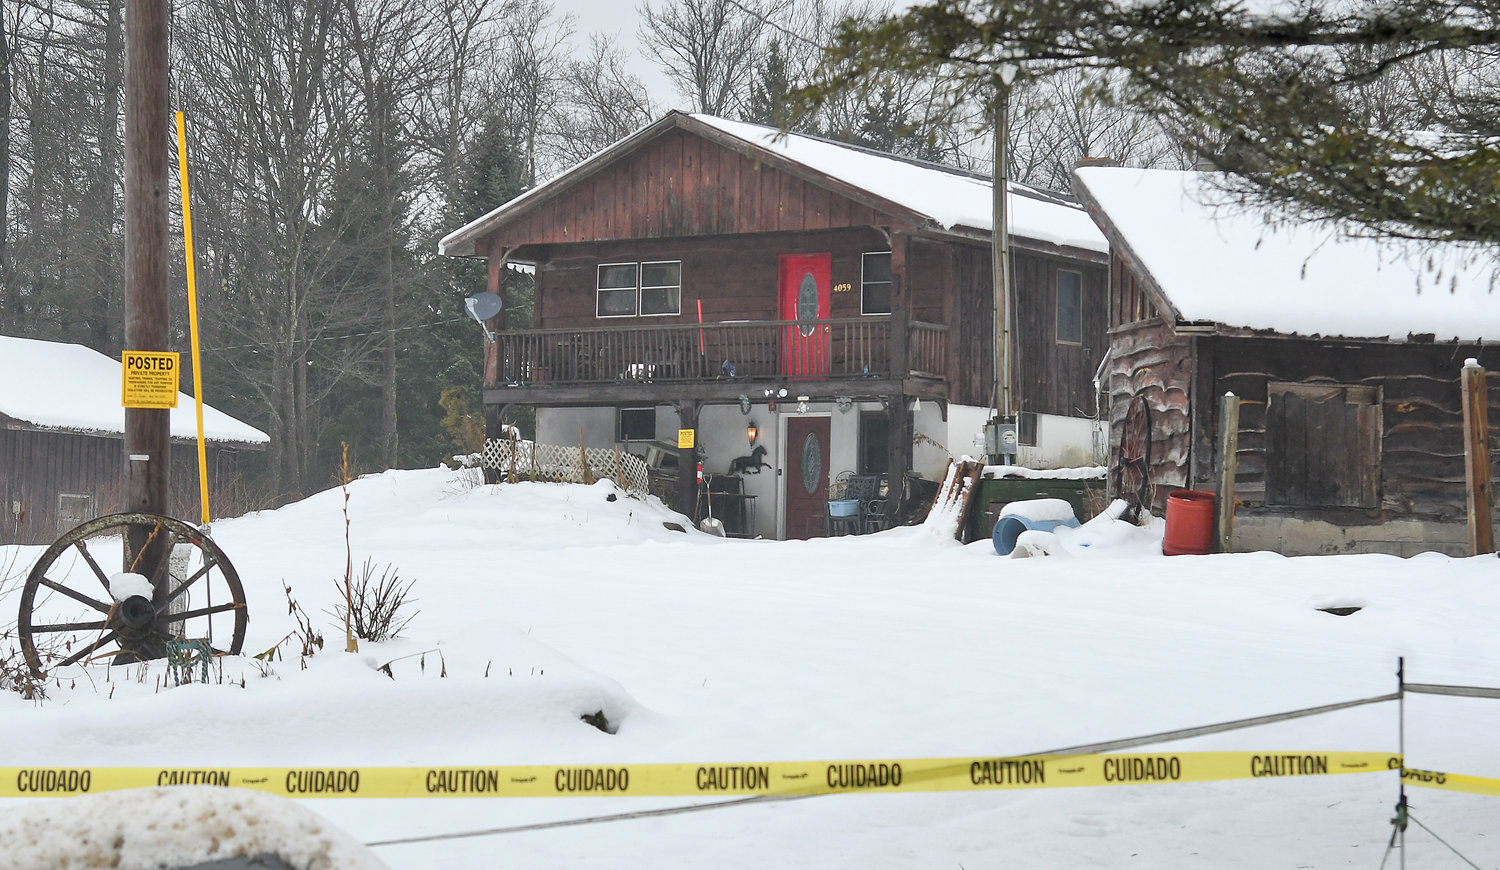 INVESTIGATION CONTINUES — A body was found outside what is believed to be this home on Mud Lake Road in West Leyden in Lewis County last weekend. The body was sent Thursday to a medical examiner for a proper autopsy and DNA identification, according to investigators.